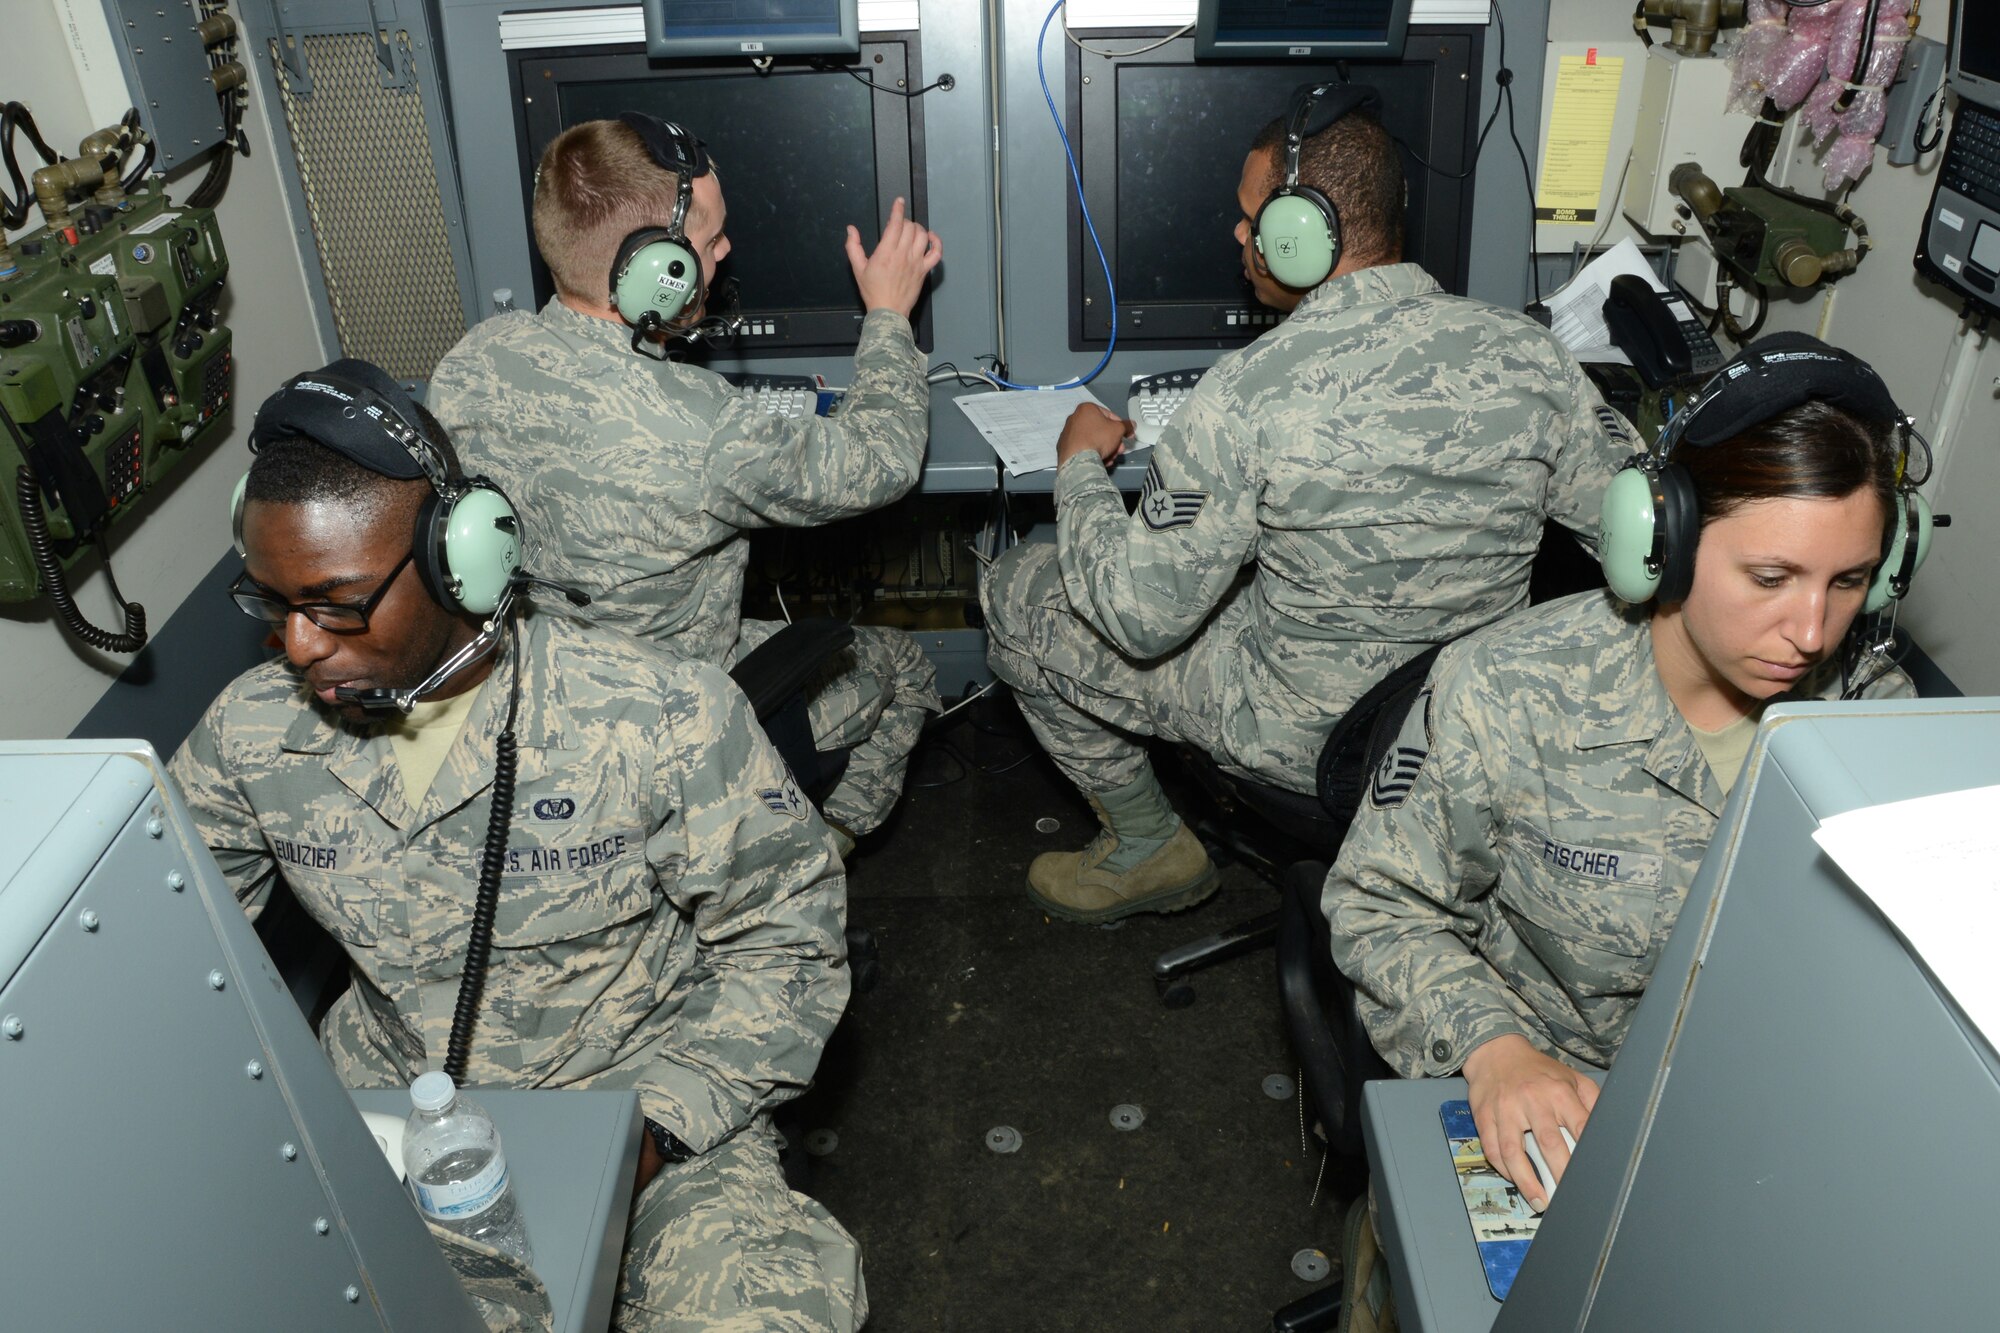 (Front) Airmen 1st Class Layau Eulizer, Master Sgt. Charleen Fischer, (back) Capt. Forrest Kimes and Staff Sgt. Erin Laporte, all from the 103rd Air Control Squadron, perform operational checks inside one of the unit’s operations modules during a deployed training exercise at the National Guard Training Center, Sea Girt, N.J., June 10.  The unit operated in field conditions using satellite communications to facilitate the command and control of simulated military aircraft from the field. (U.S. Air National Guard photo by Senior Airman Emmanuel Santiago)  